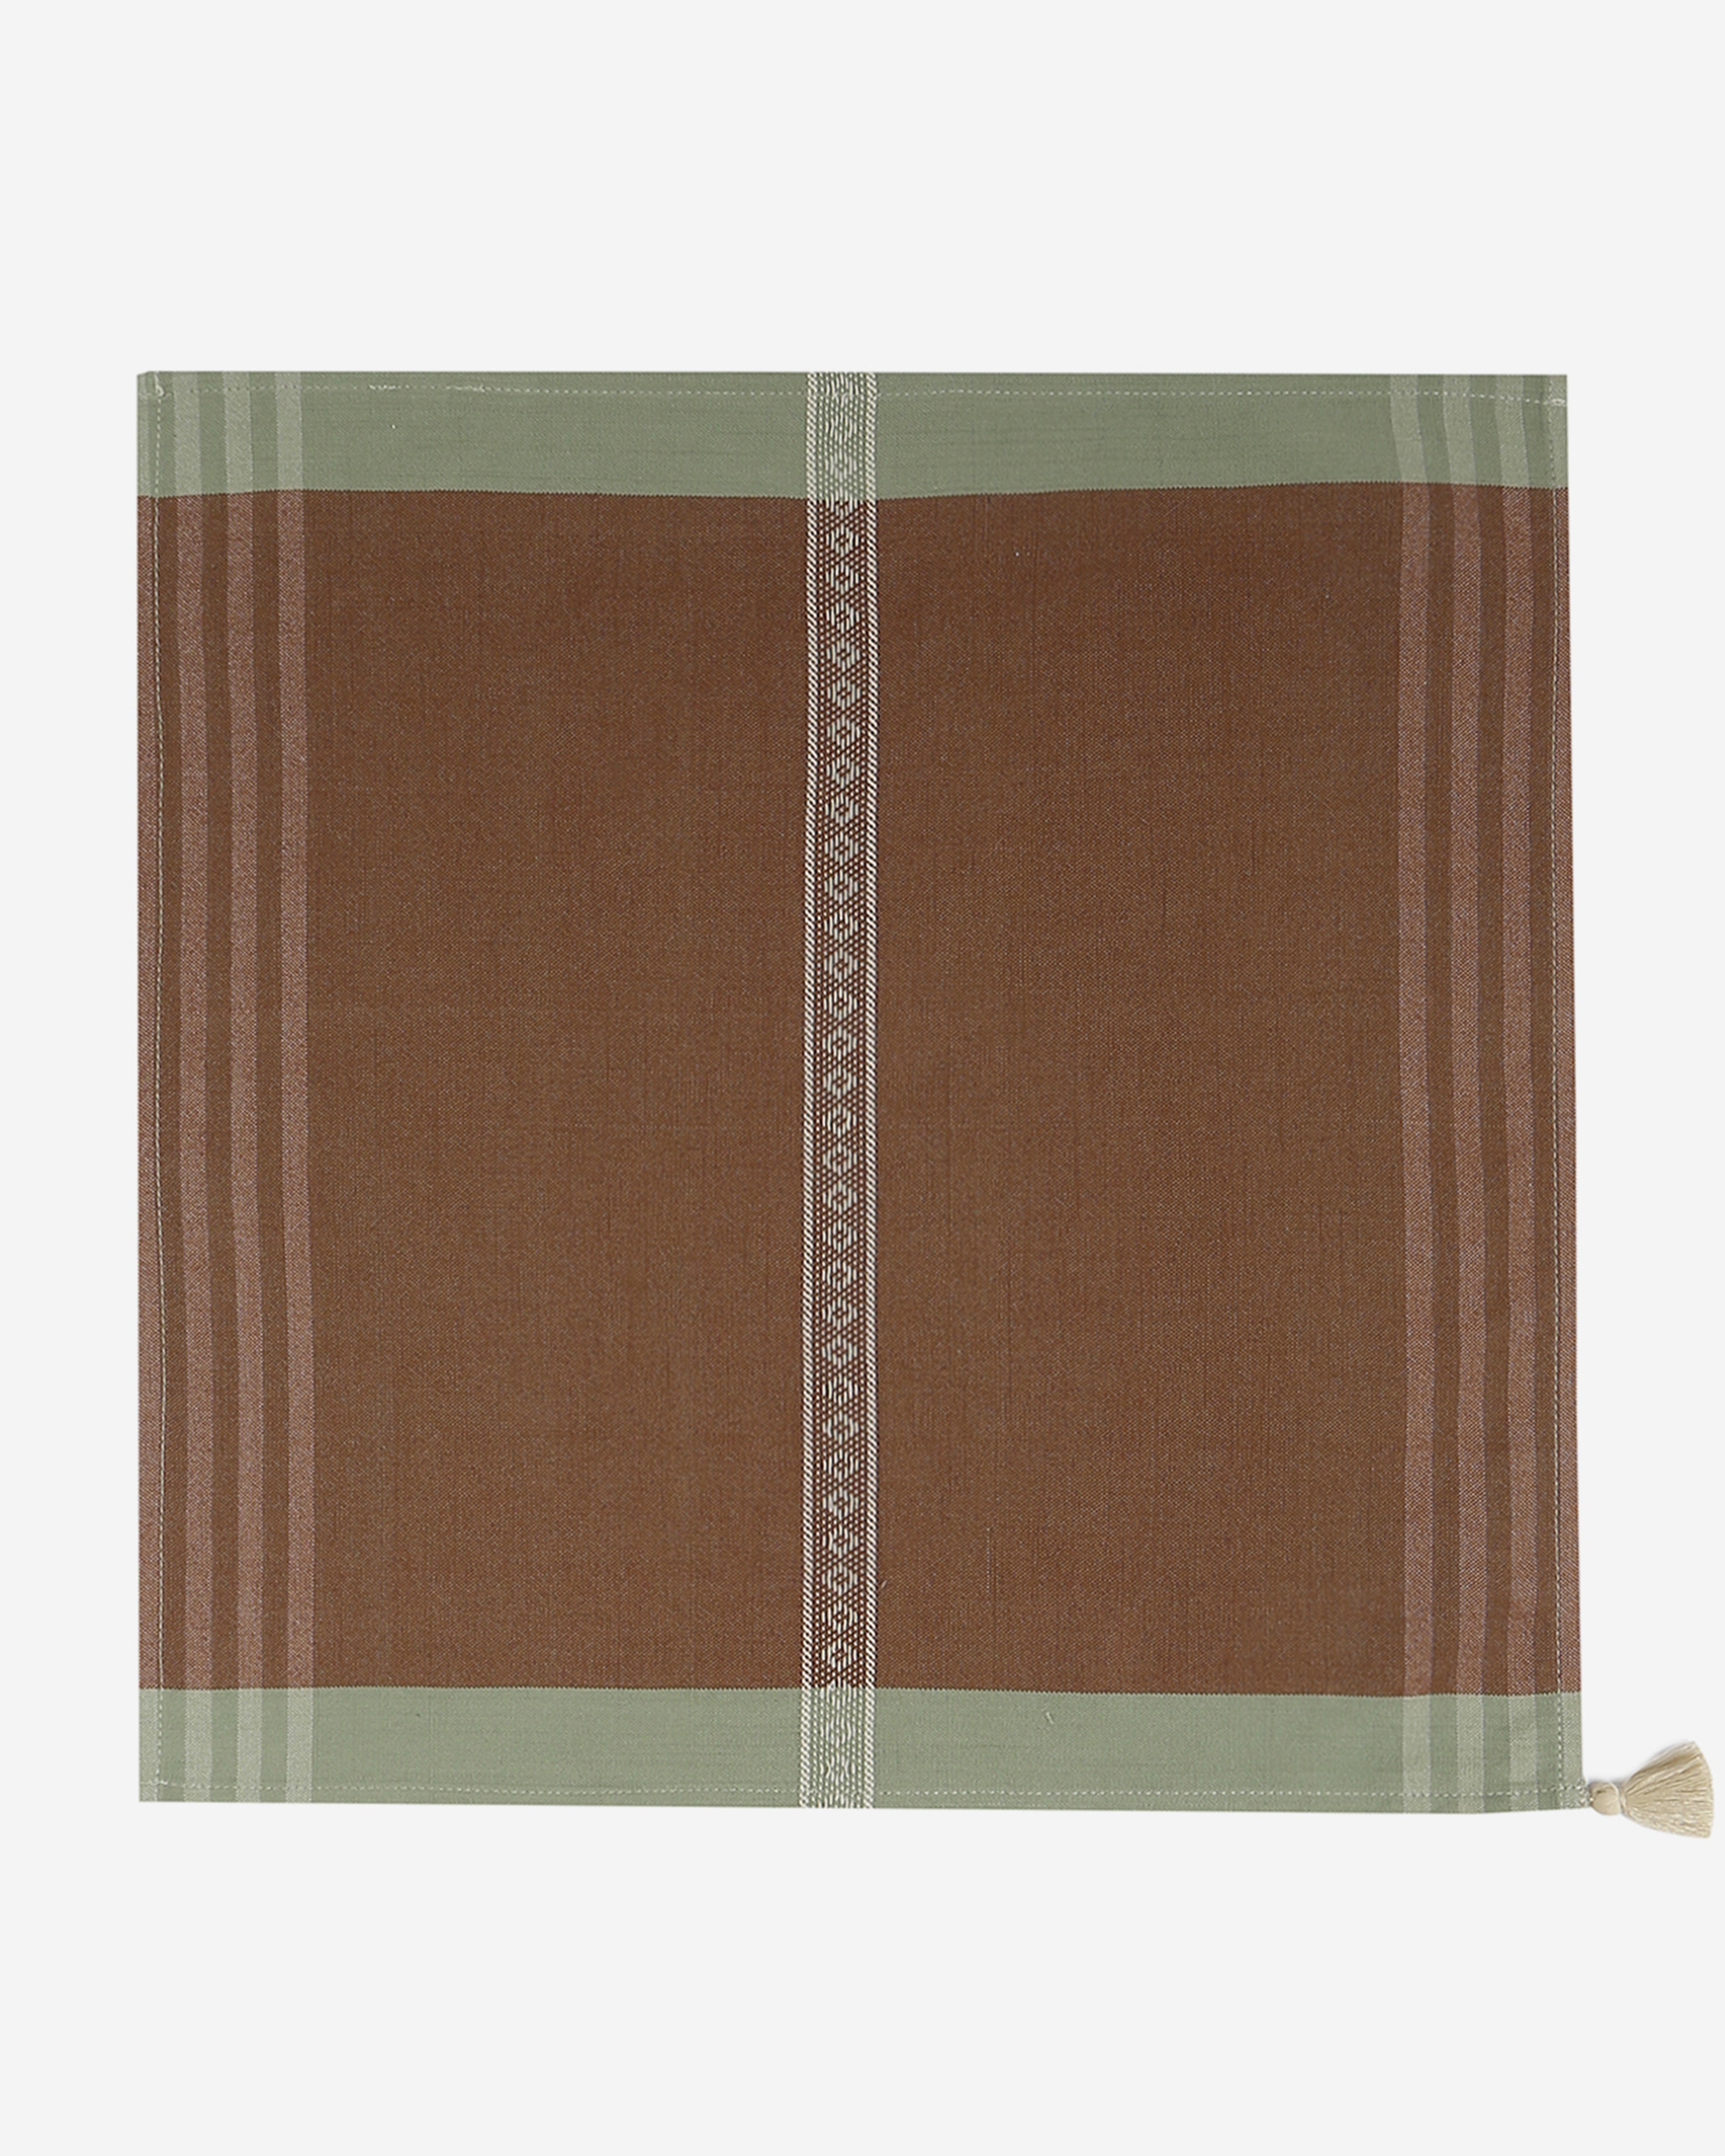 Marbella Extra Weft Cotton Table Napkins | Set of 6